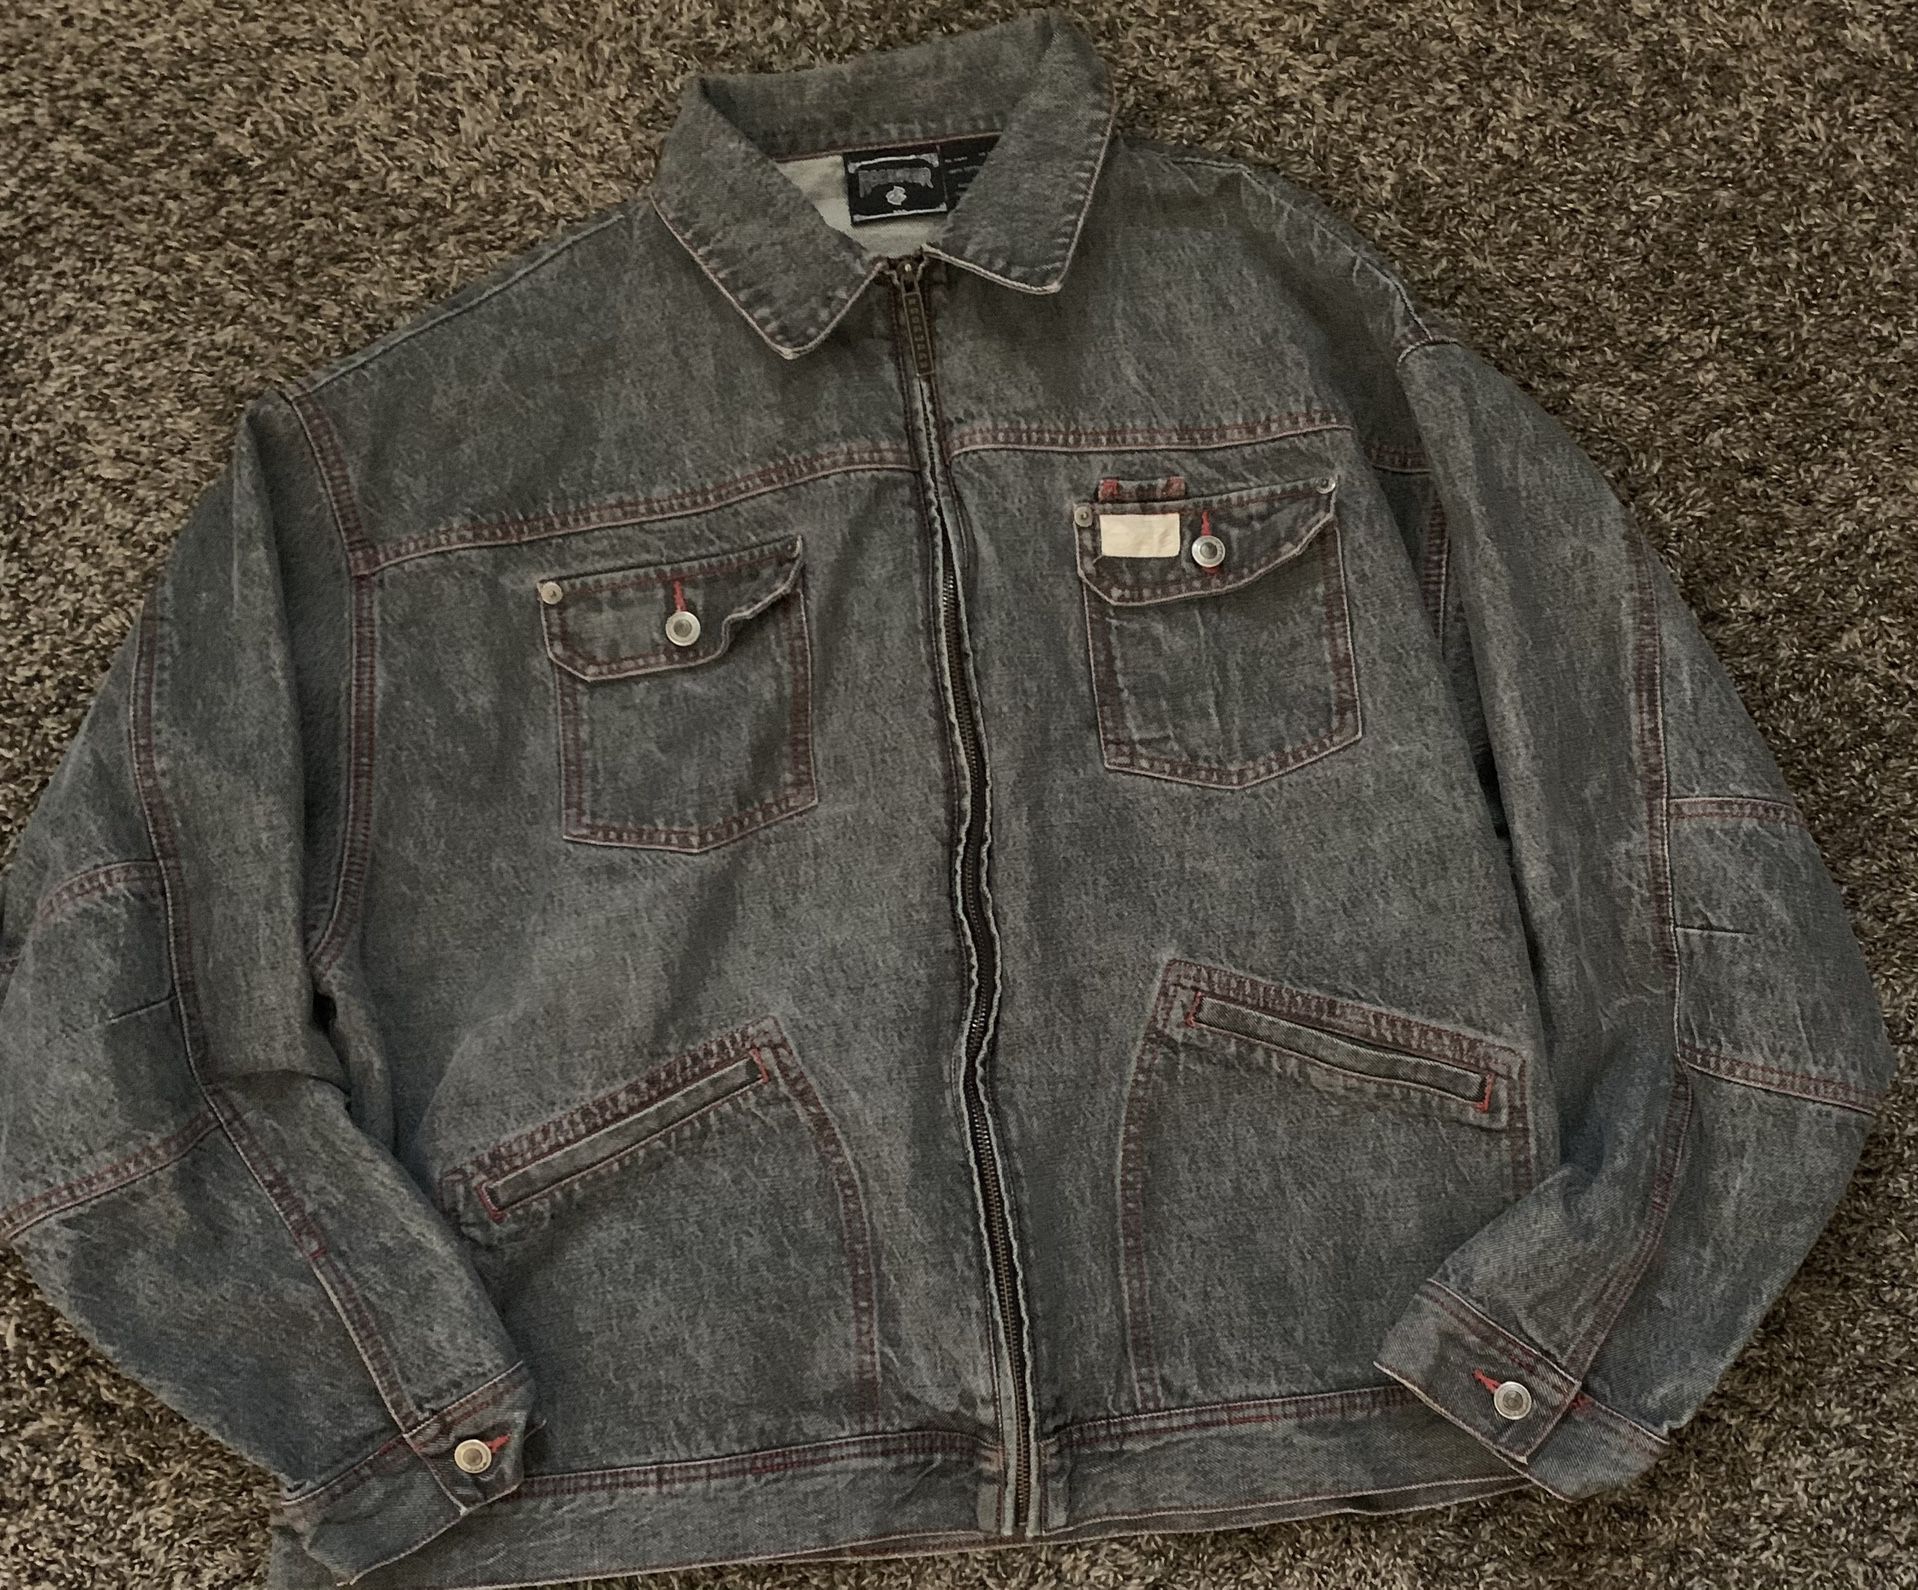 Vintage Rocawear Jean Jacket No Flaws And Ships Fast